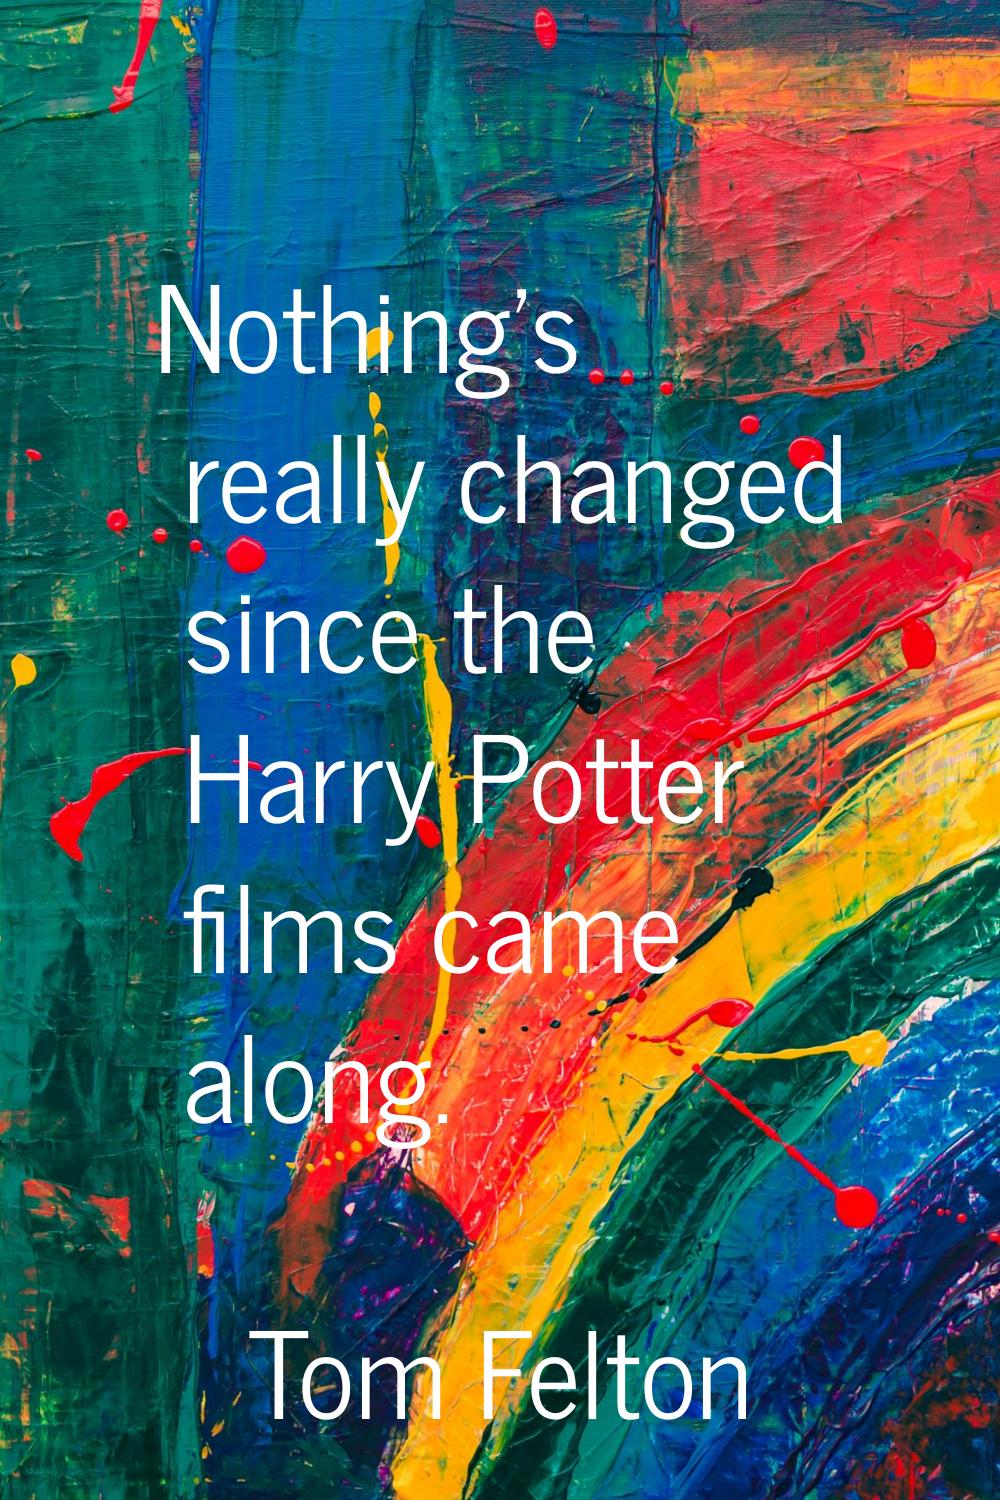 Nothing's really changed since the Harry Potter films came along.